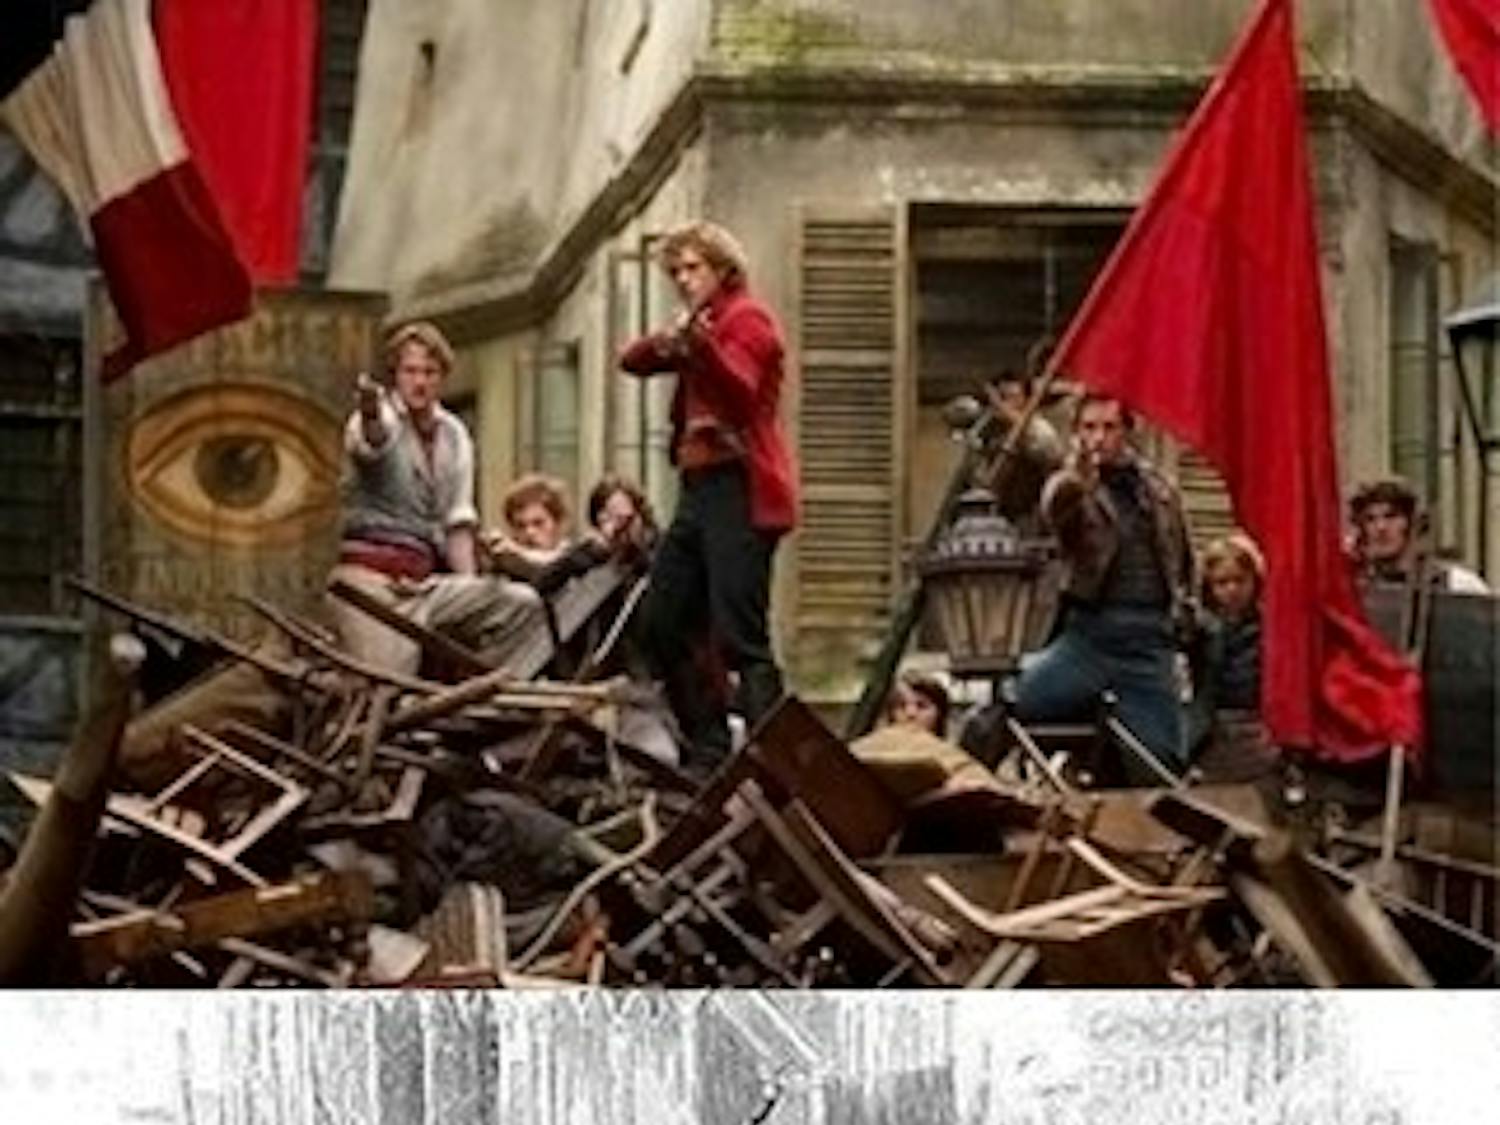 The Sons of the Barricade in the 2012 movie, in historical context, and in the minds of the fans. Photos courtesy Google Images, Wikipedia and Tumblr